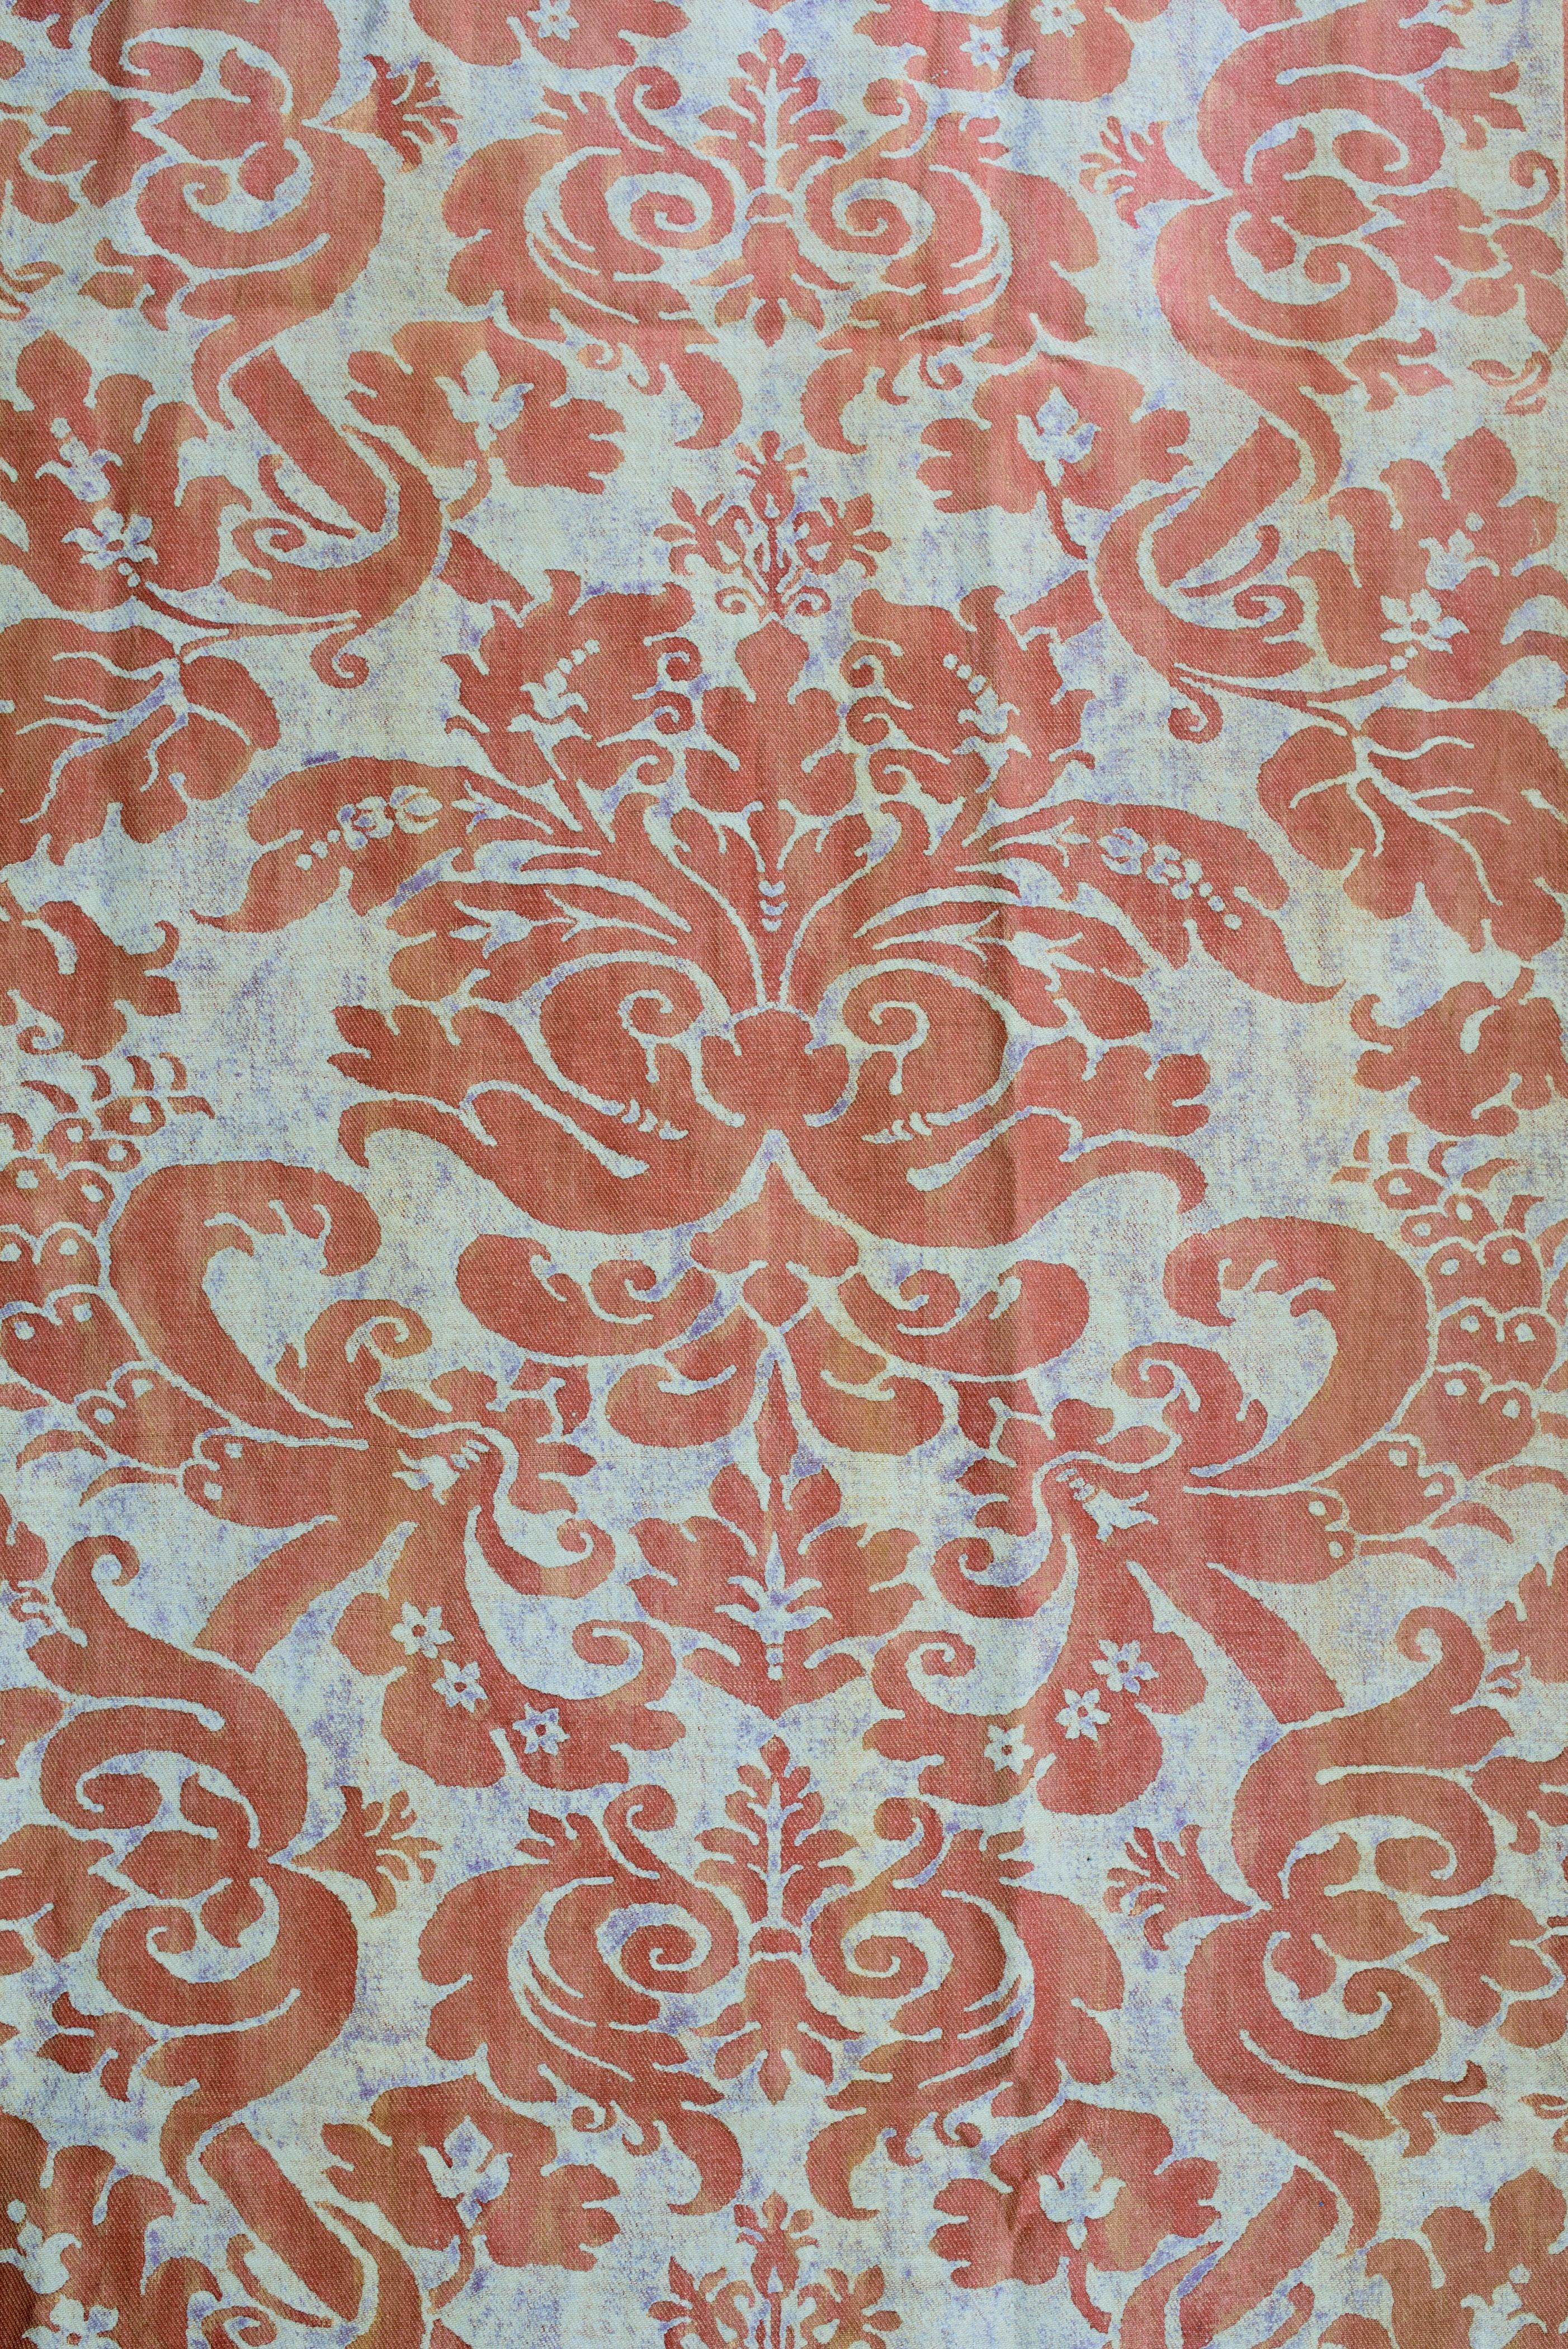 A Mariano Fortuny Printed Cotton Fabric - Italy Circa 1940 For Sale 1